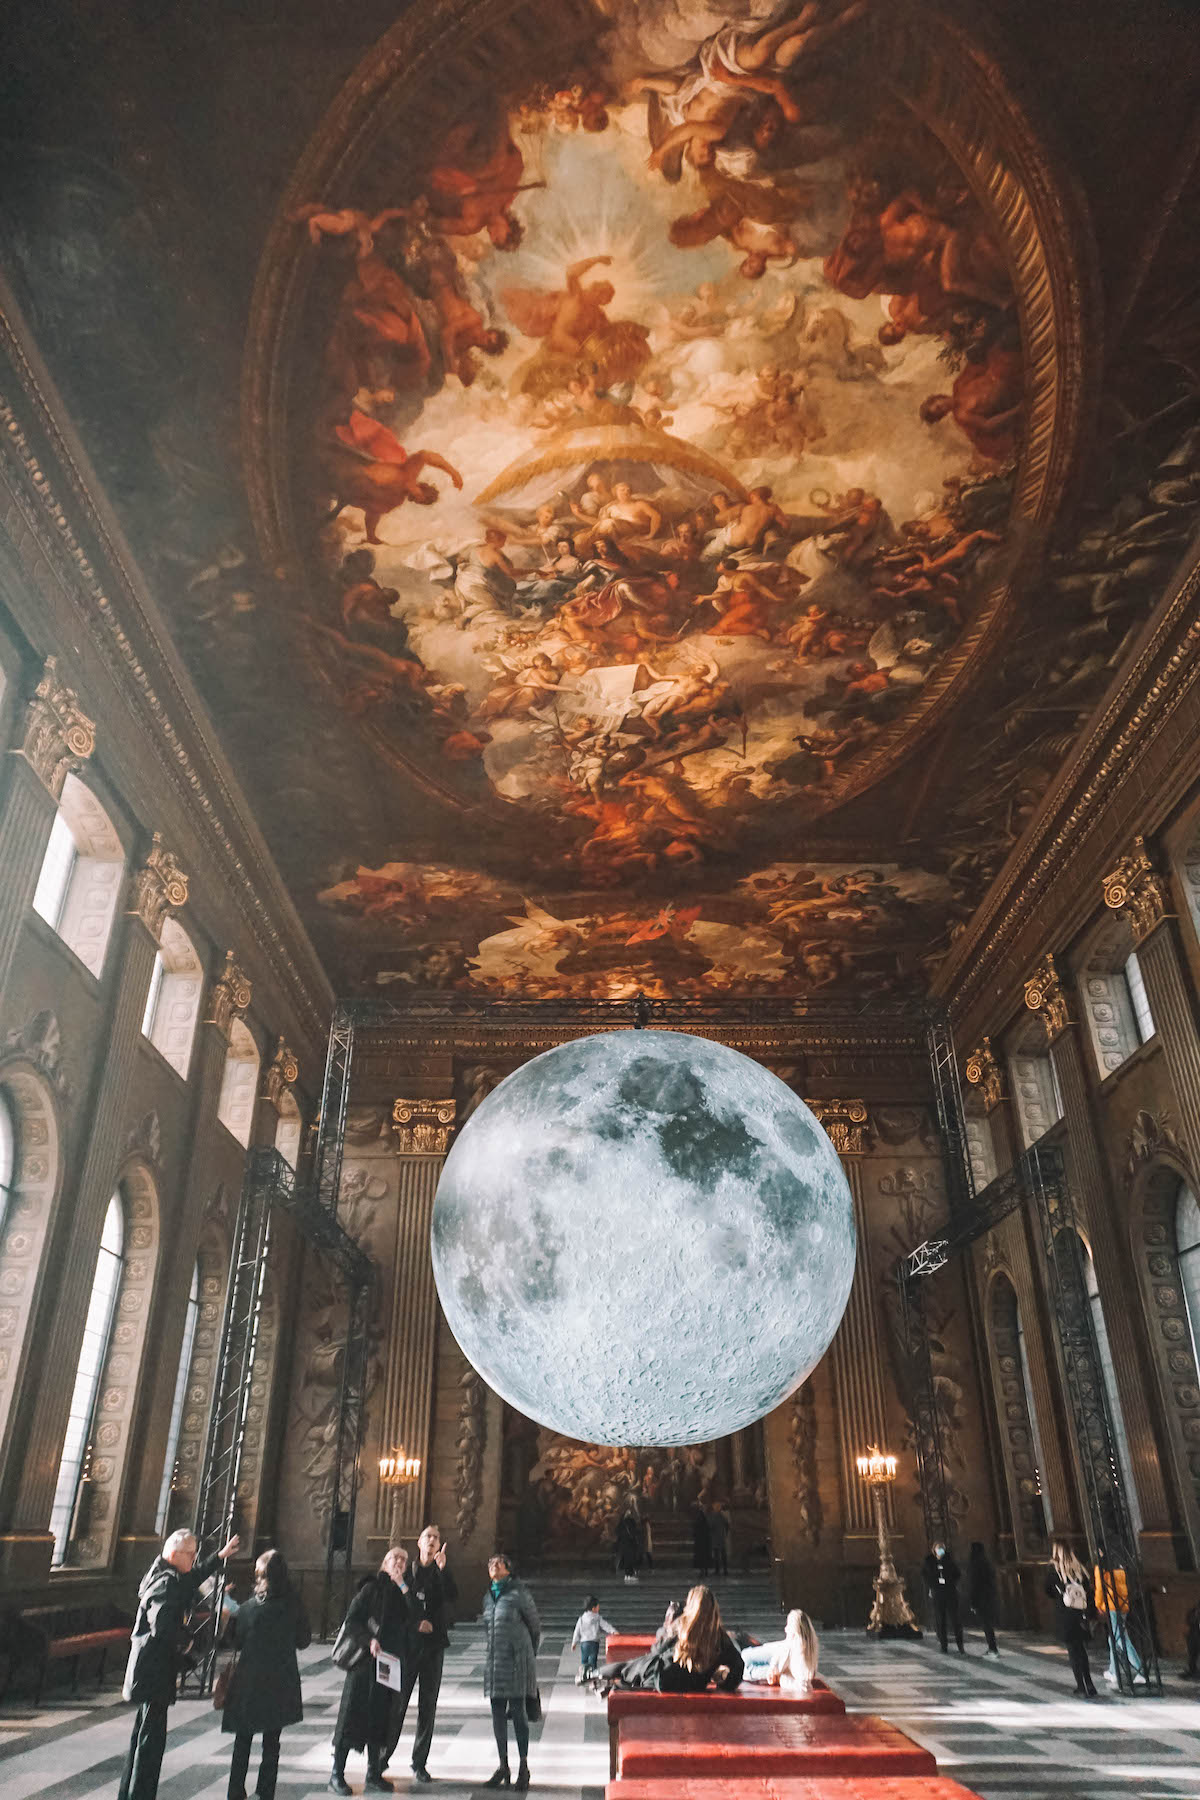 The Painted Hall in Greenwich, with the Moon exhibit